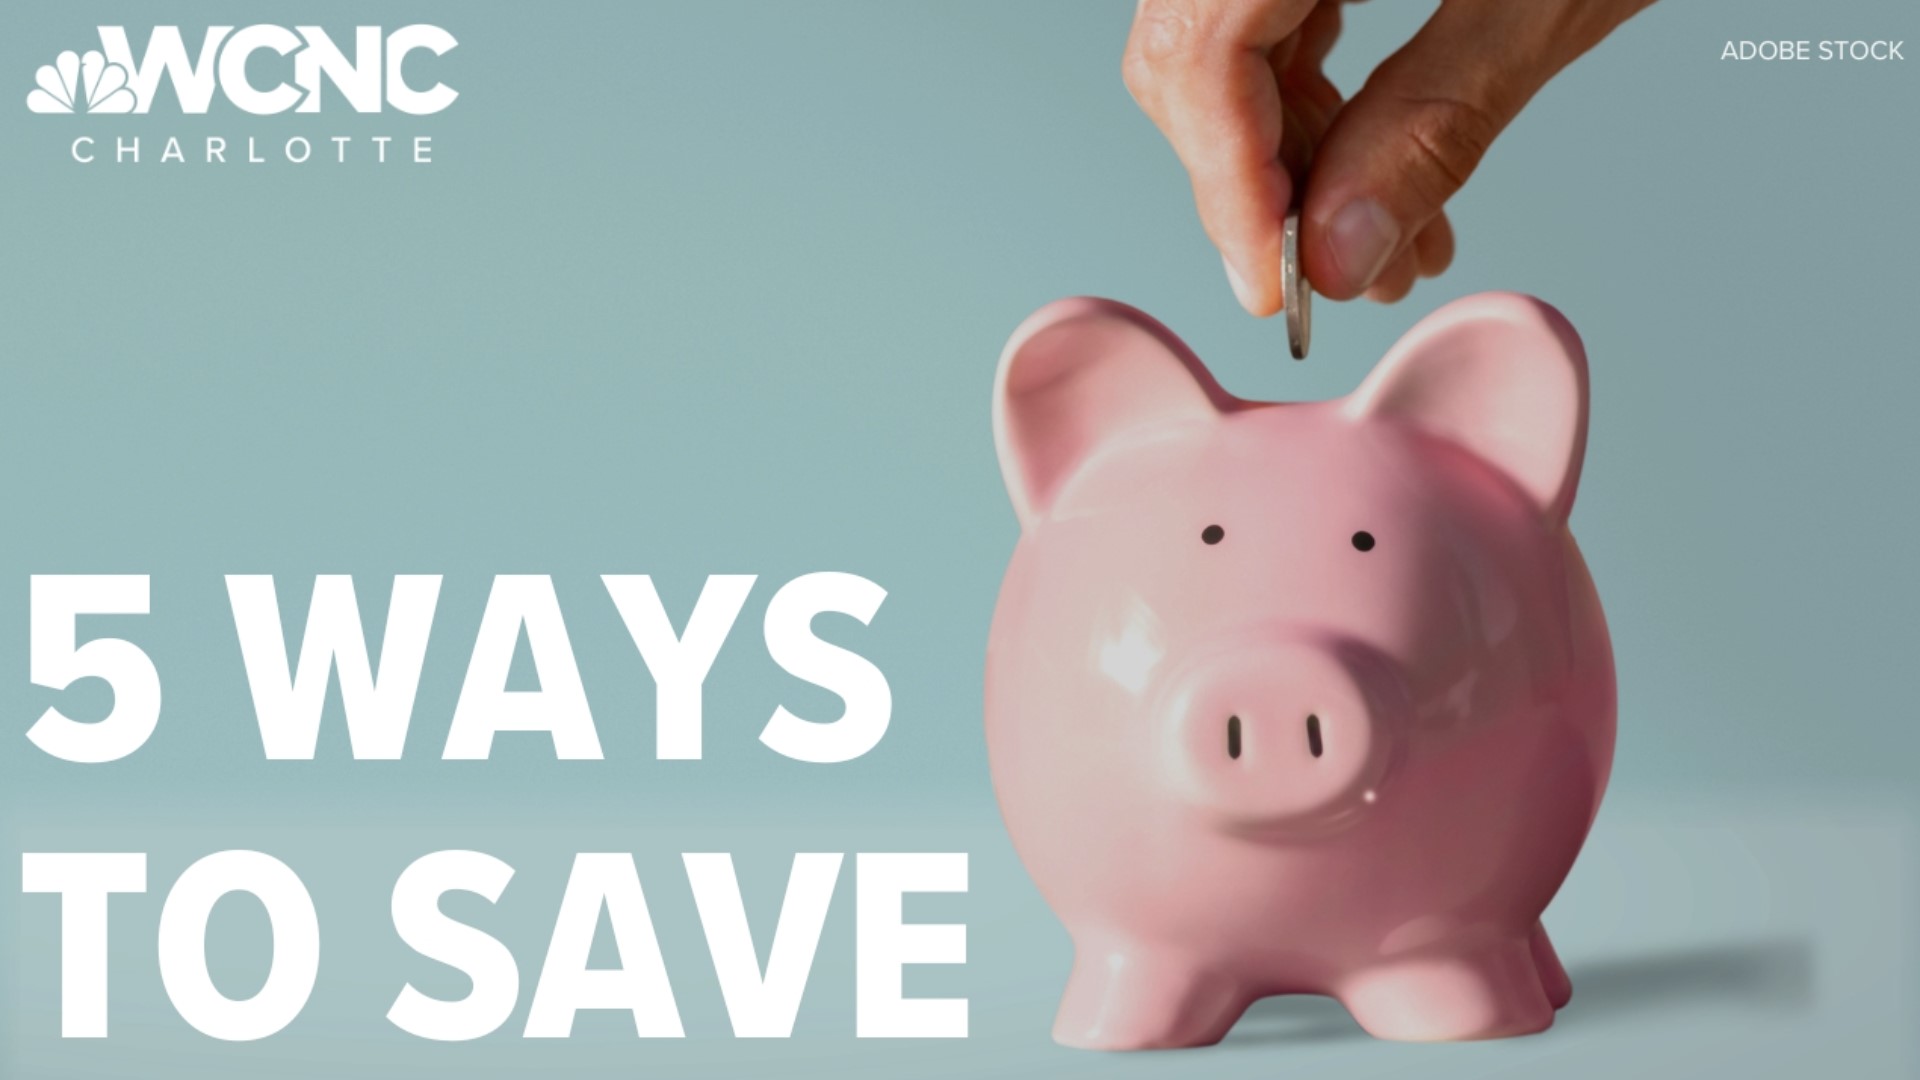 Saving money can seem like an impossible feat, especially in this economy.